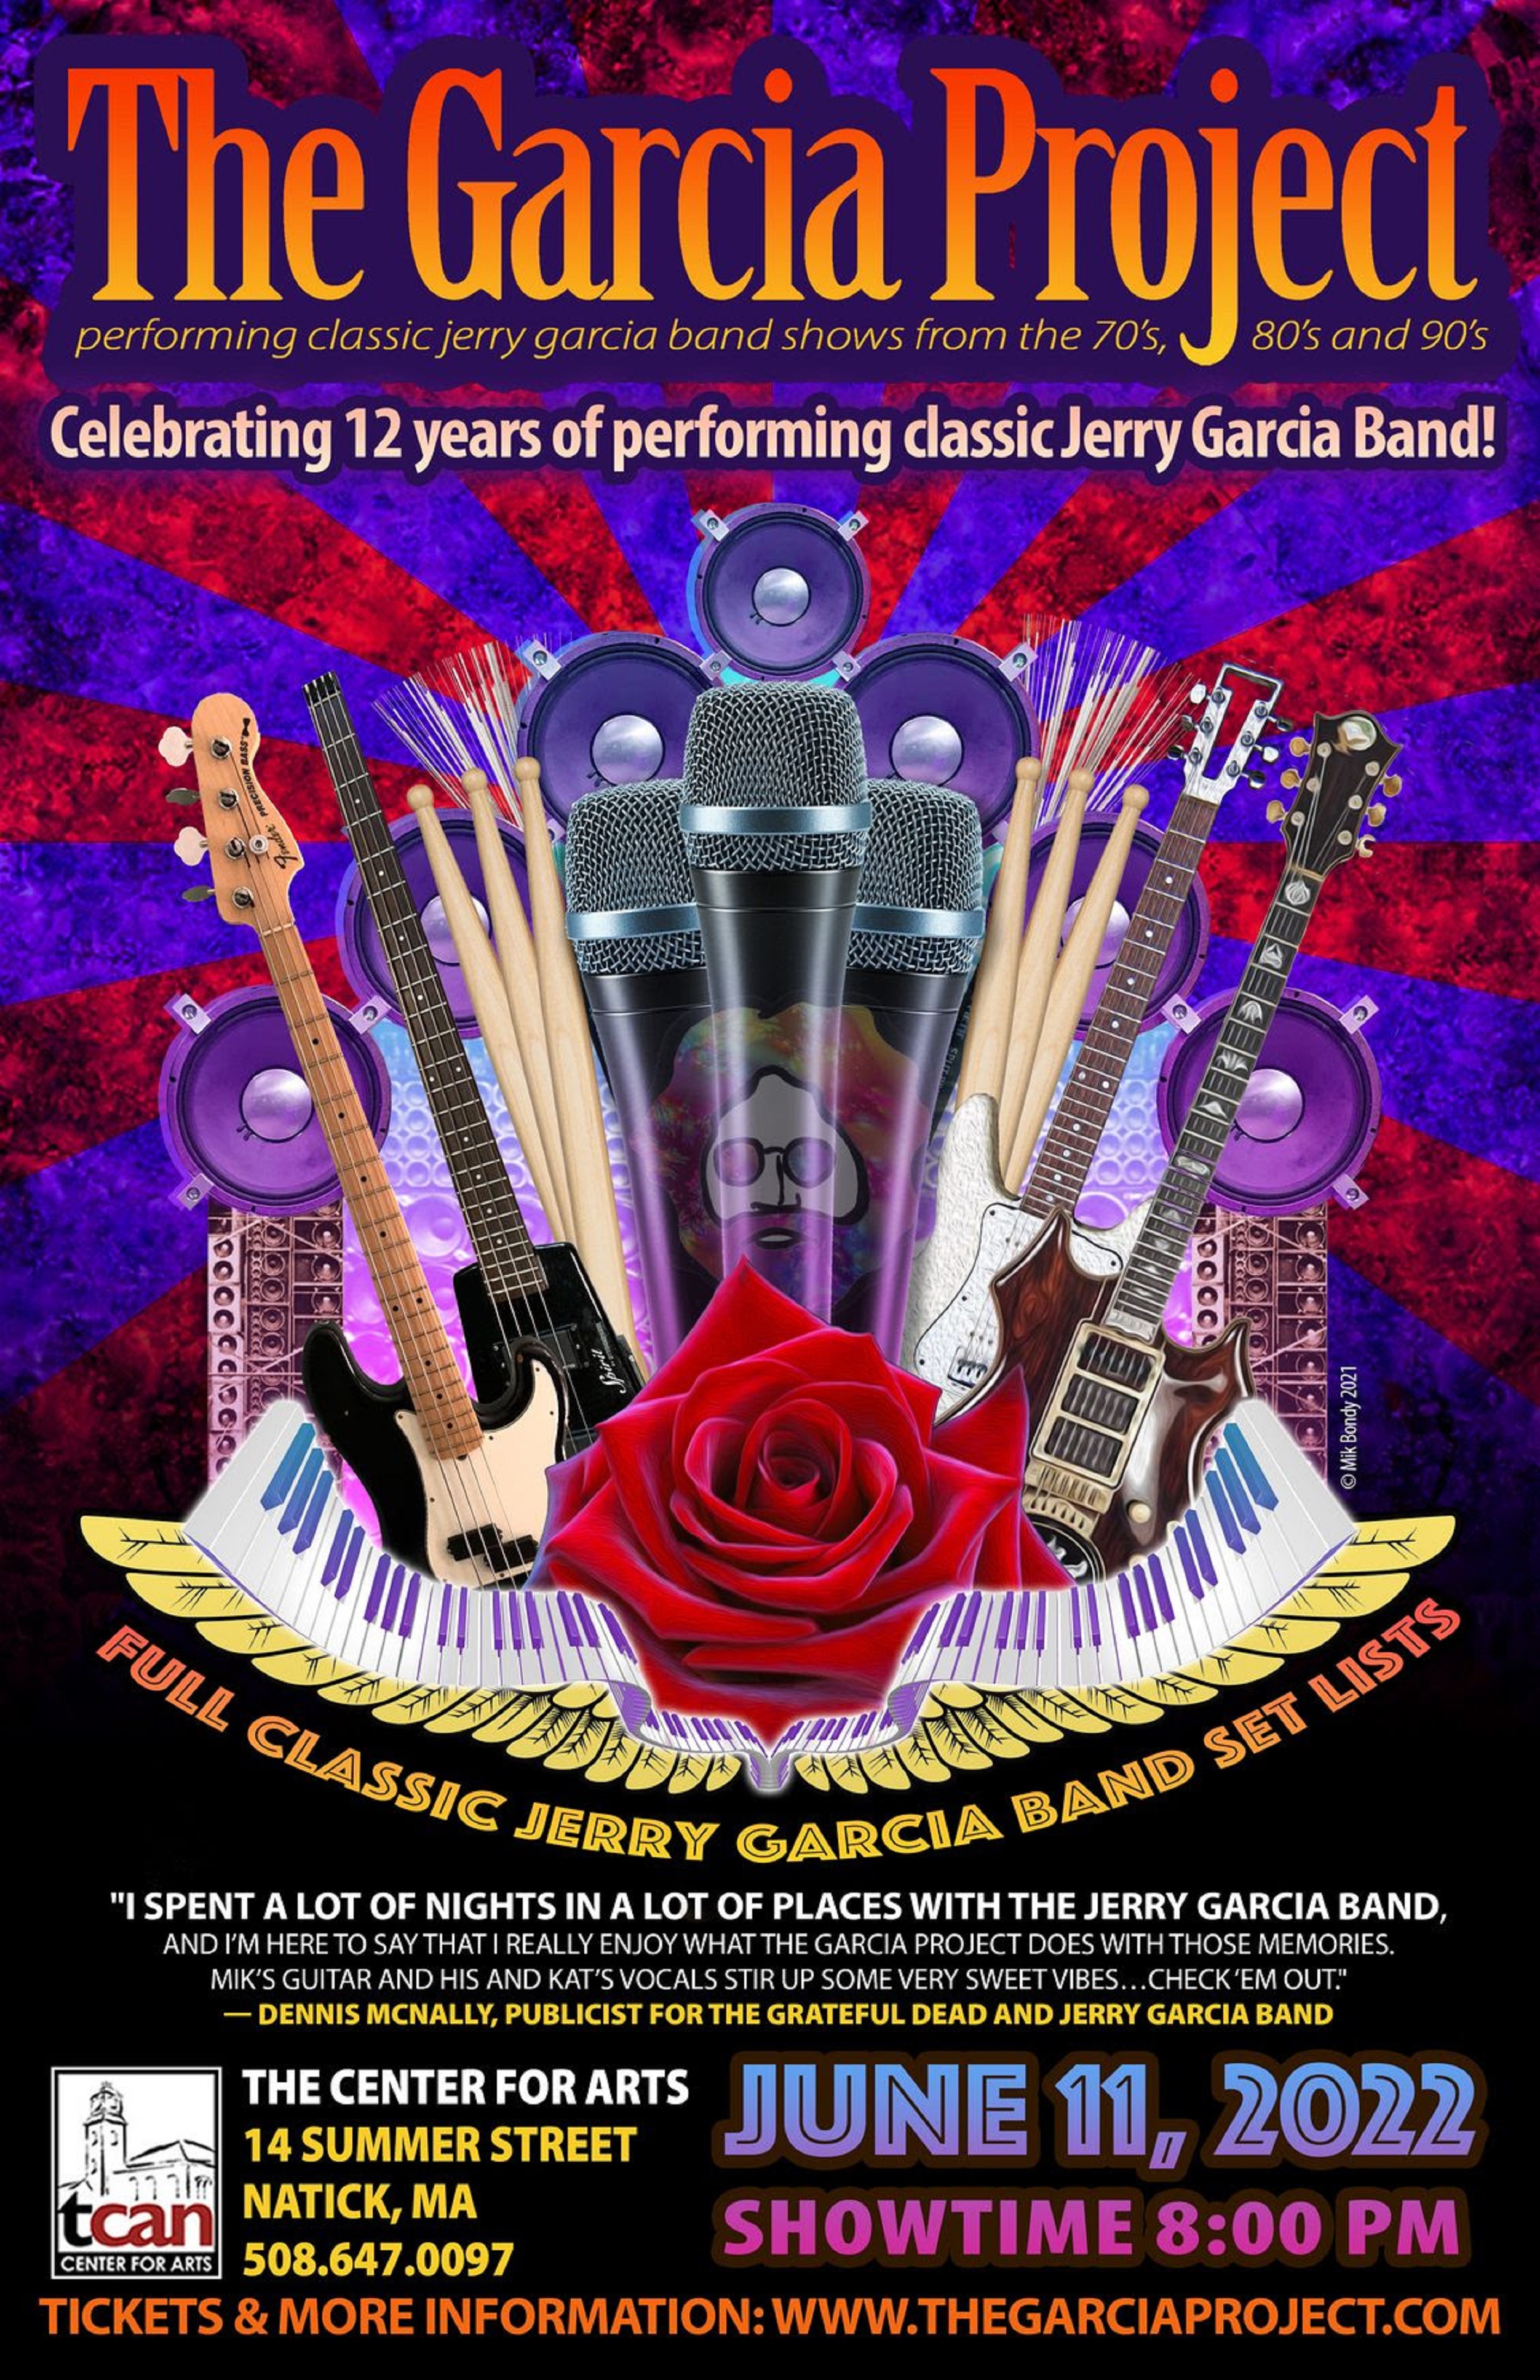 The Garcia Project will be live on June 11, 2022 in Natick MA